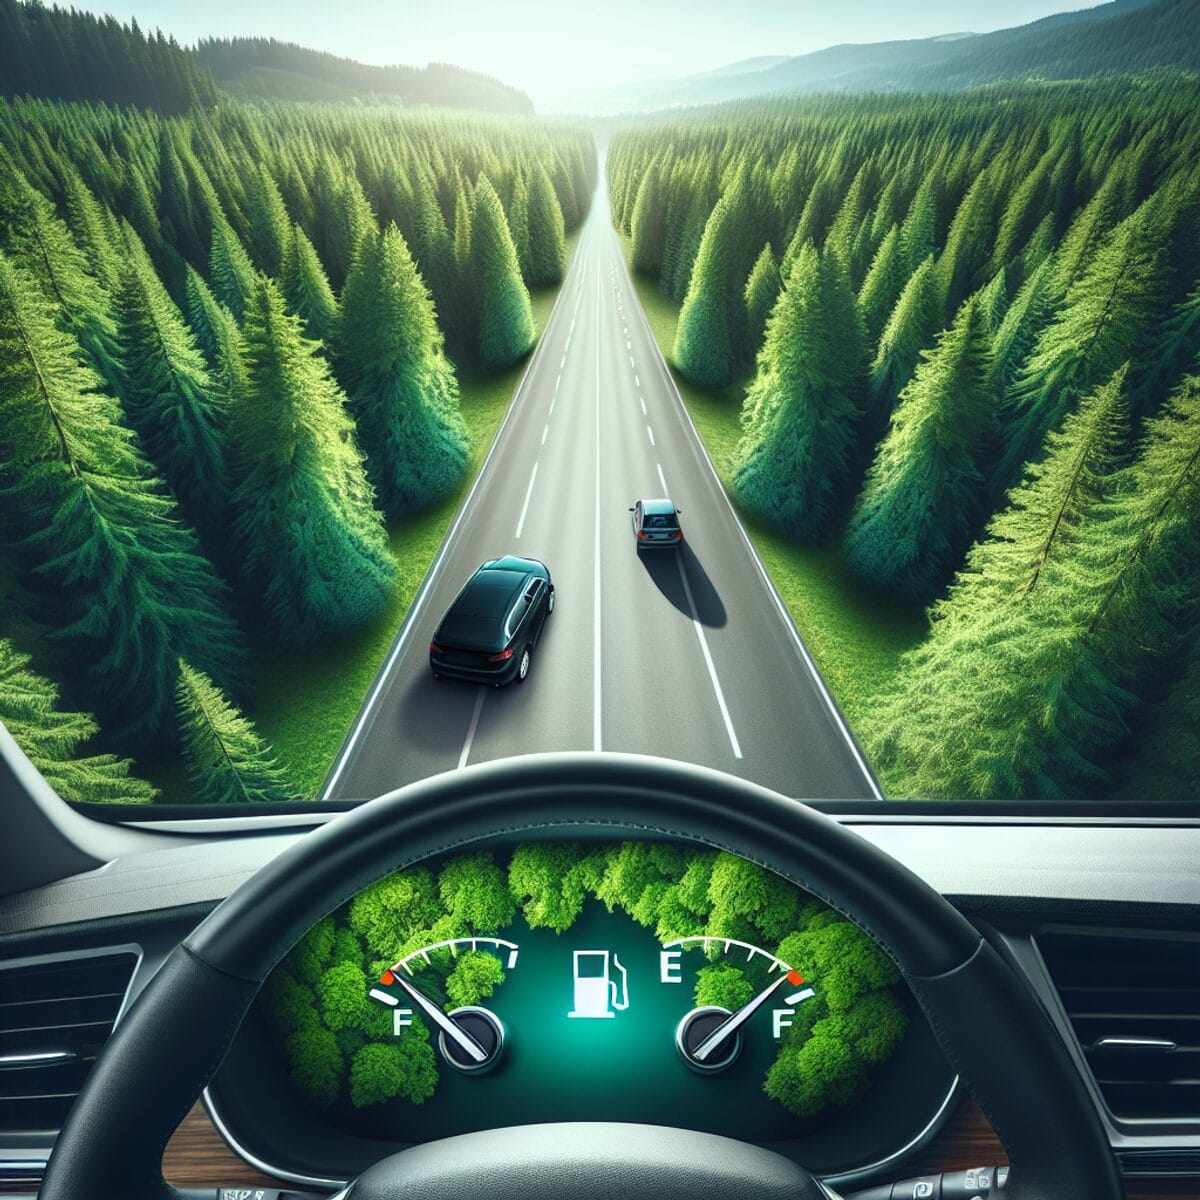 A car driving on an asphalt road in a lush green forest with a full fuel gauge.